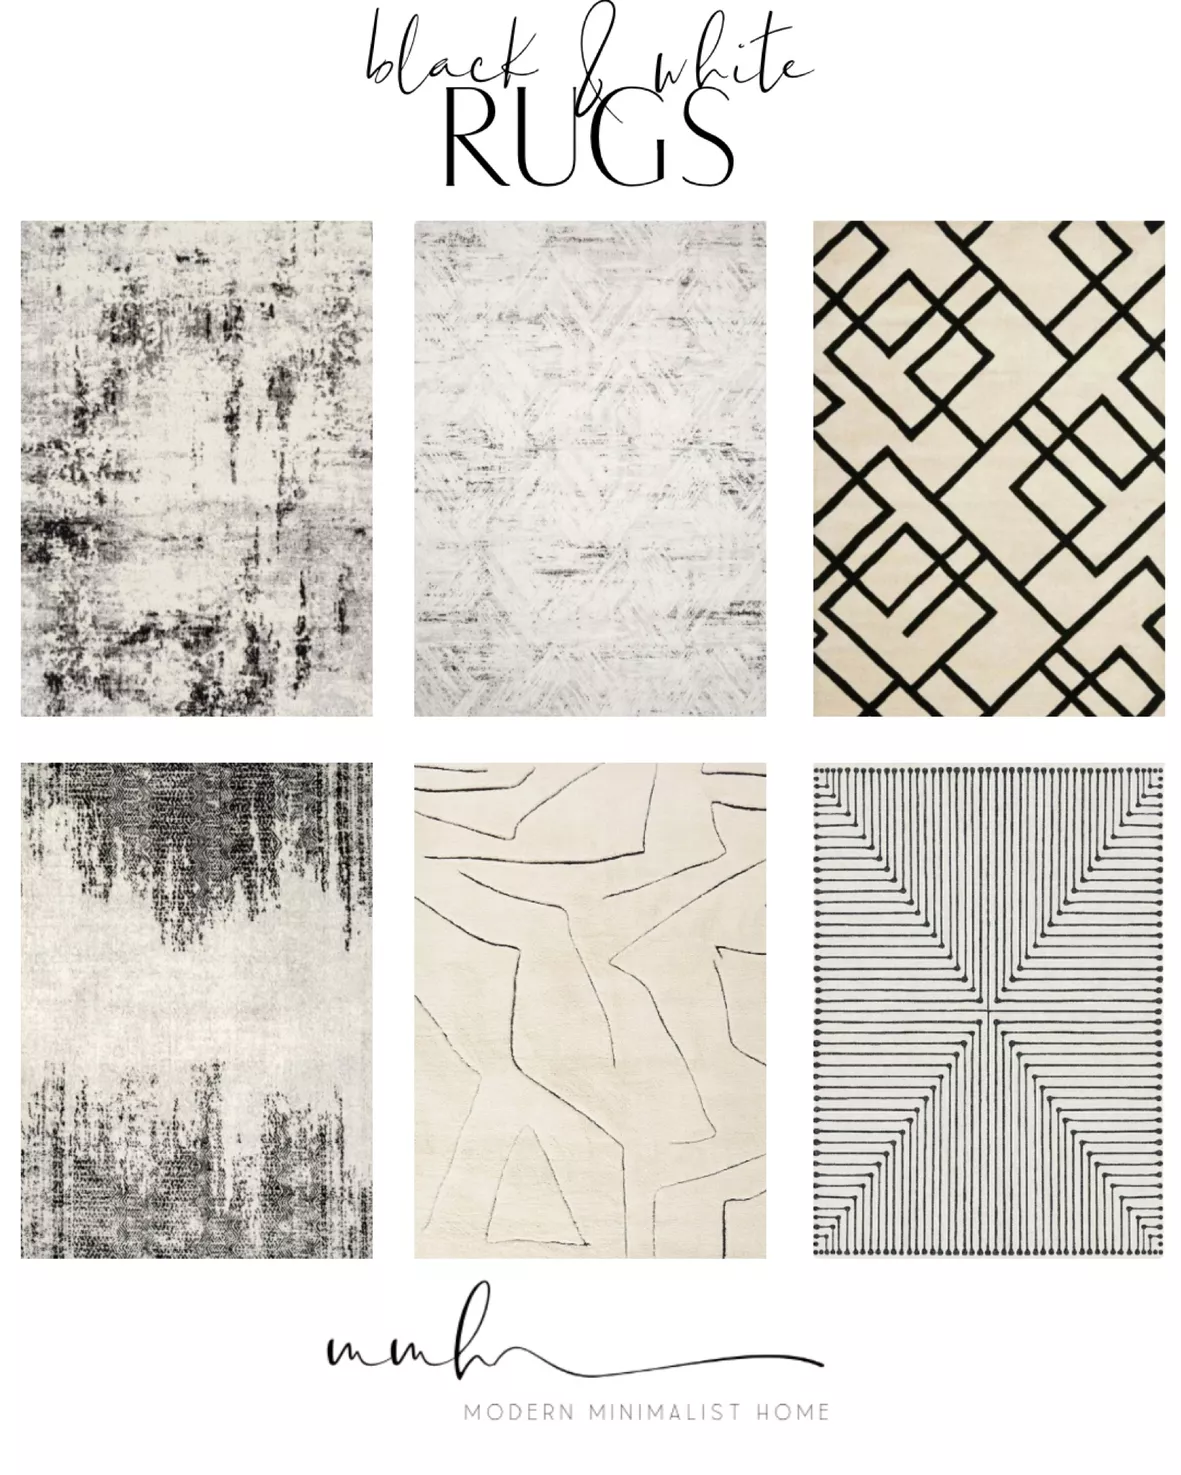 When and How to Use Kitchen Area Rugs - Rugs by Roo